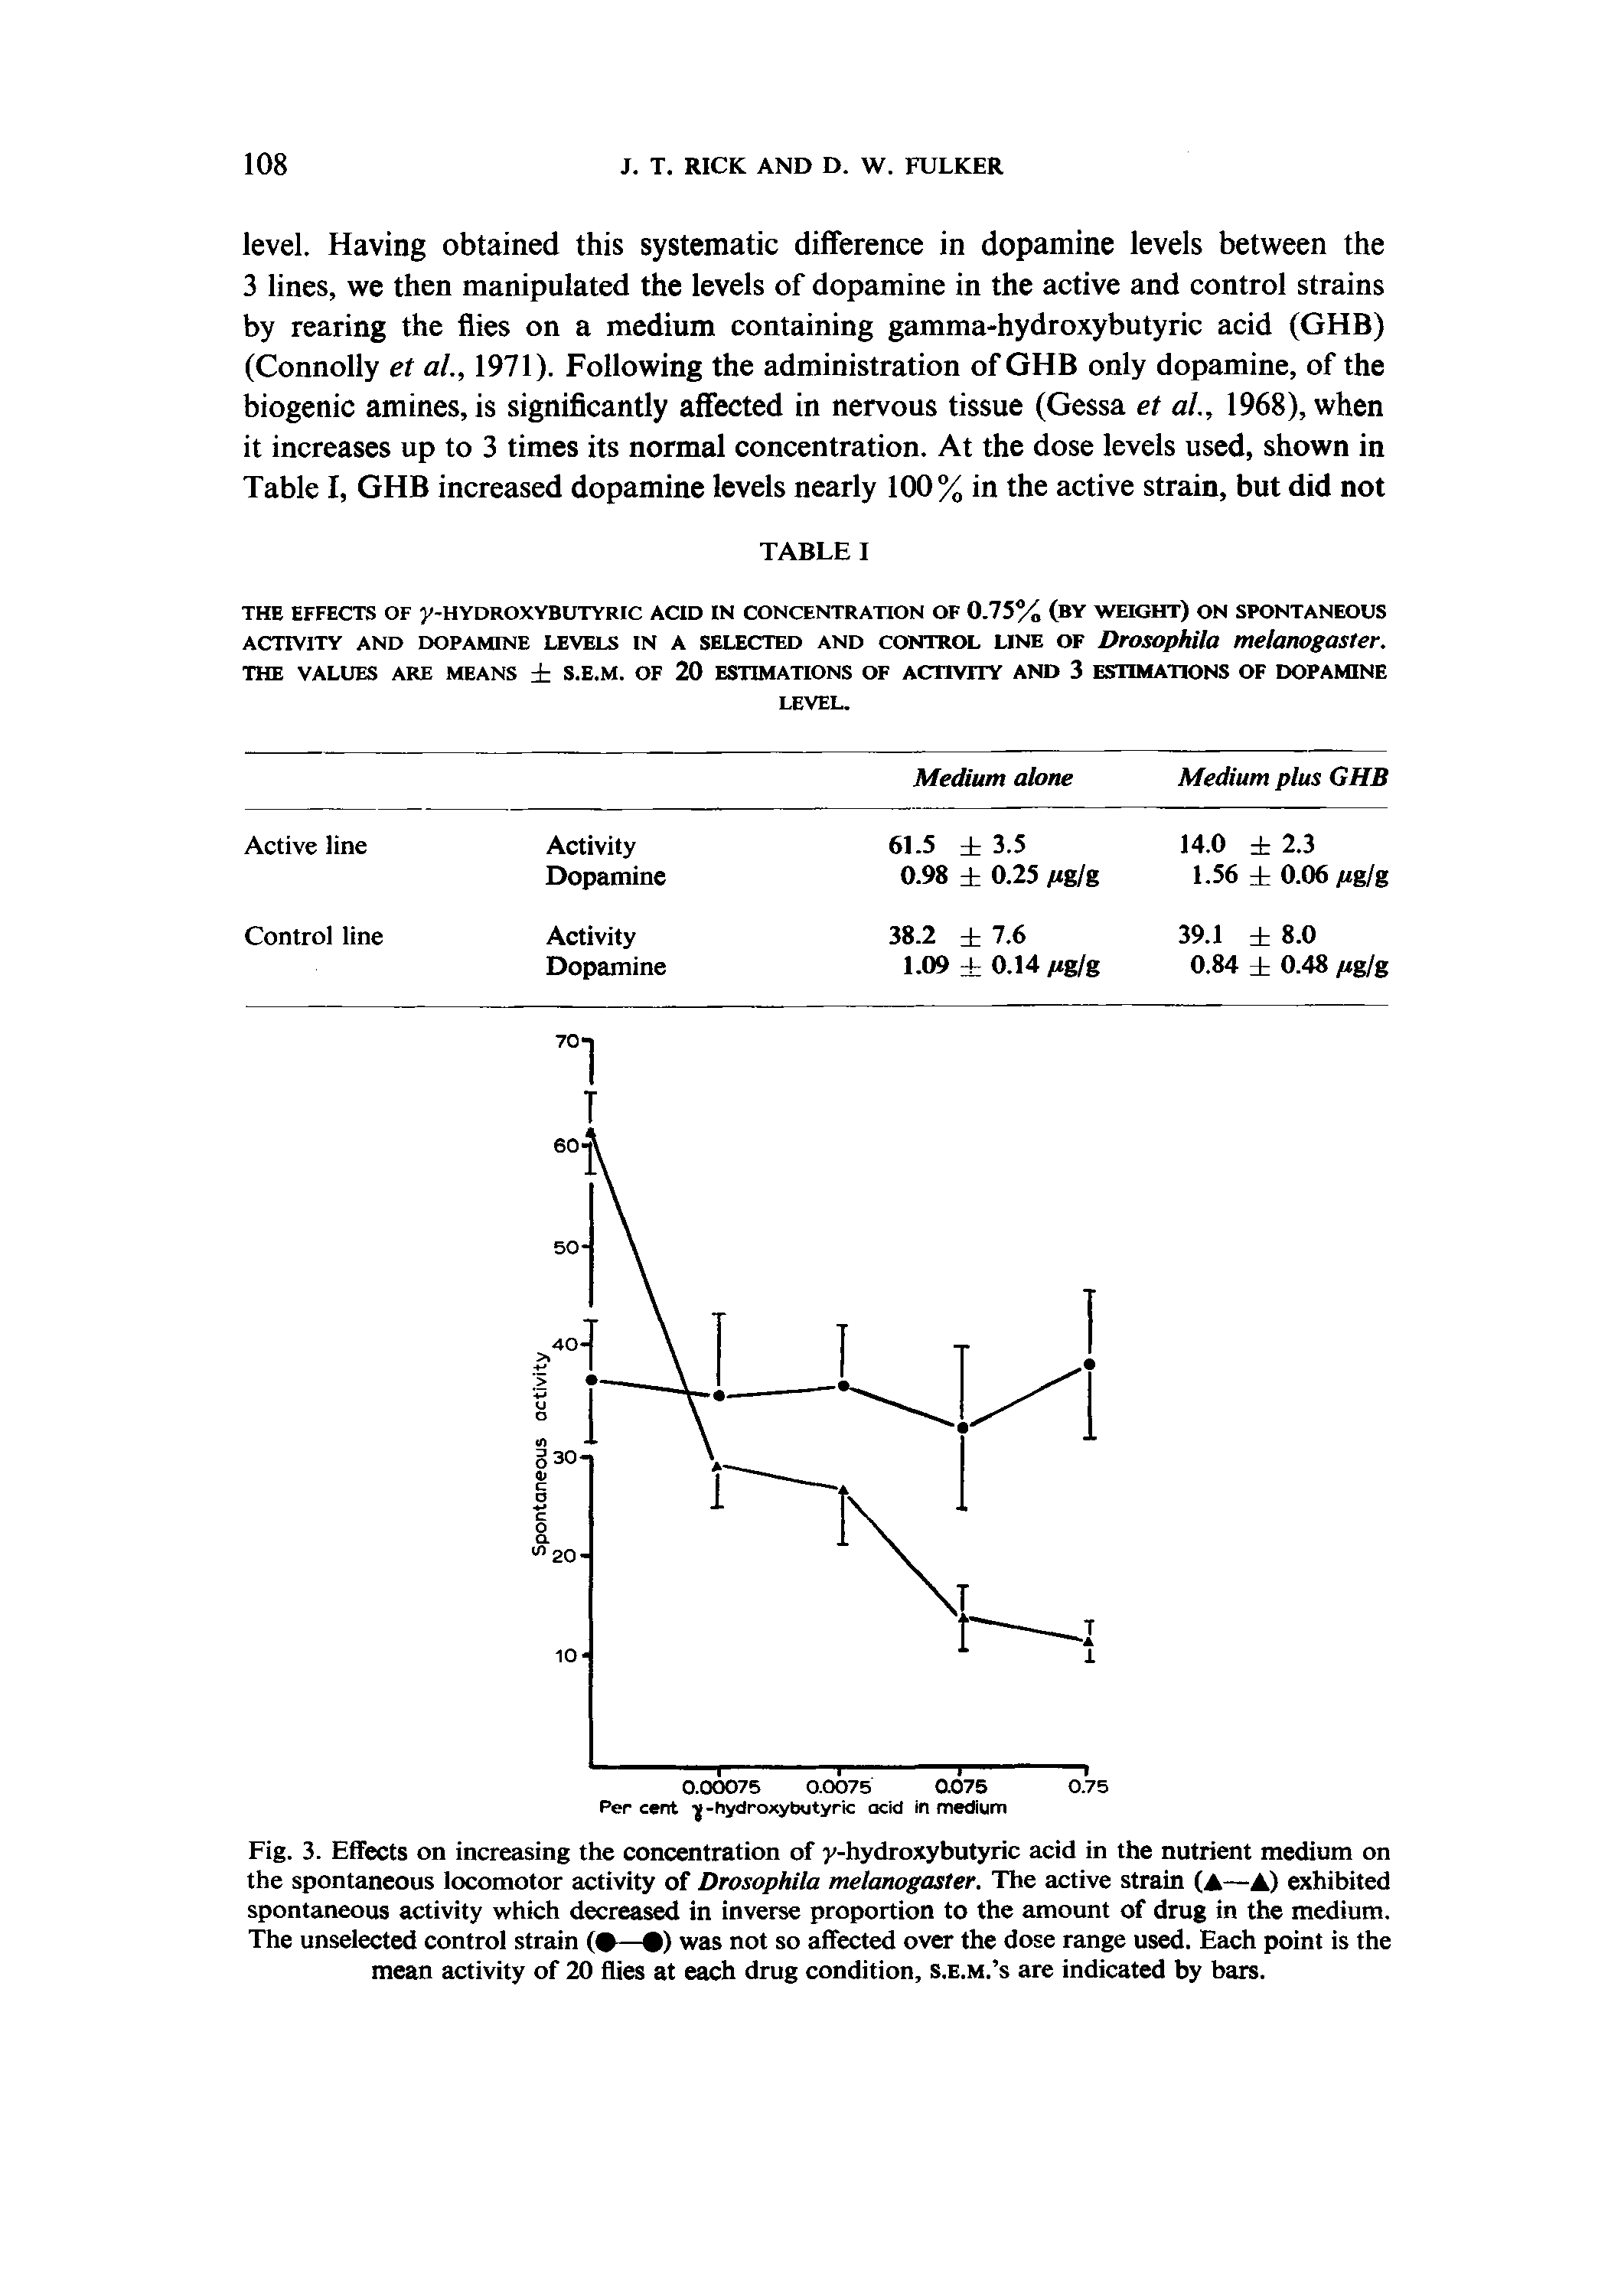 Fig. 3. Effects on increasing the concentration of y-hydroxybutyric acid in the nutrient medium on the spontaneous locomotor activity of Drosophila melanogaster. The active strain (A—A) exhibited spontaneous activity which decreased in inverse proportion to the amount of drug in the medium. The unselected control strain ( — ) was not so affected over the dose range used. Each point is the mean activity of 20 flies at each drug condition, s.e.m. s are indicated by bars.